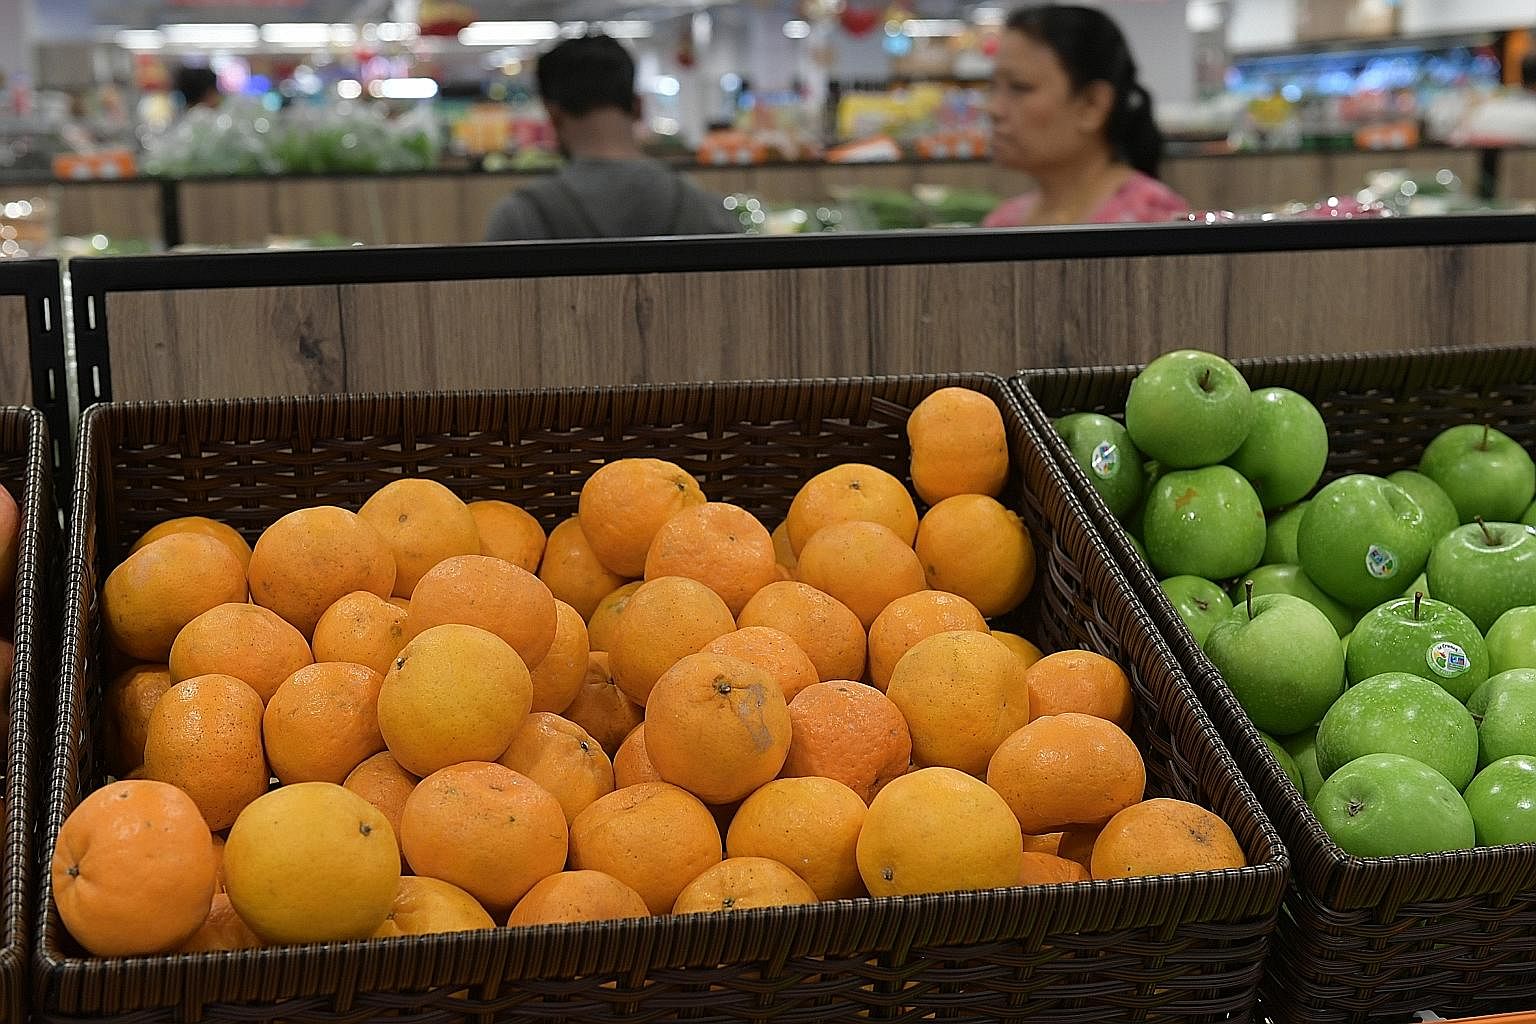 The Cantonese pronunciation of giving mandarin oranges – “song gam” – is the same as “giving gold”.